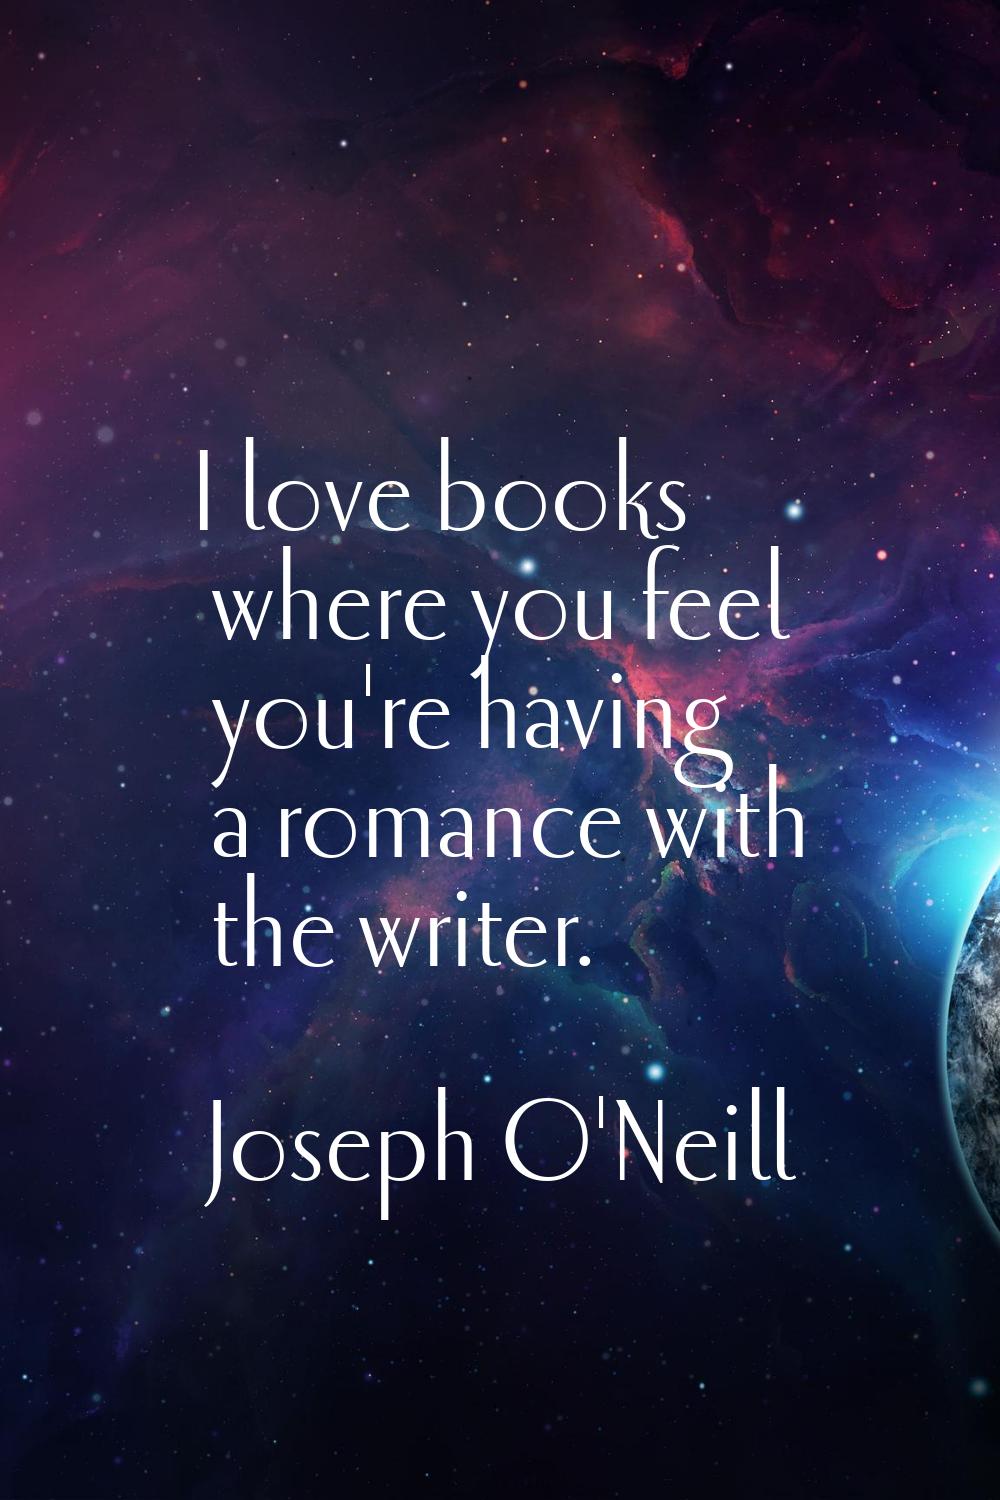 I love books where you feel you're having a romance with the writer.